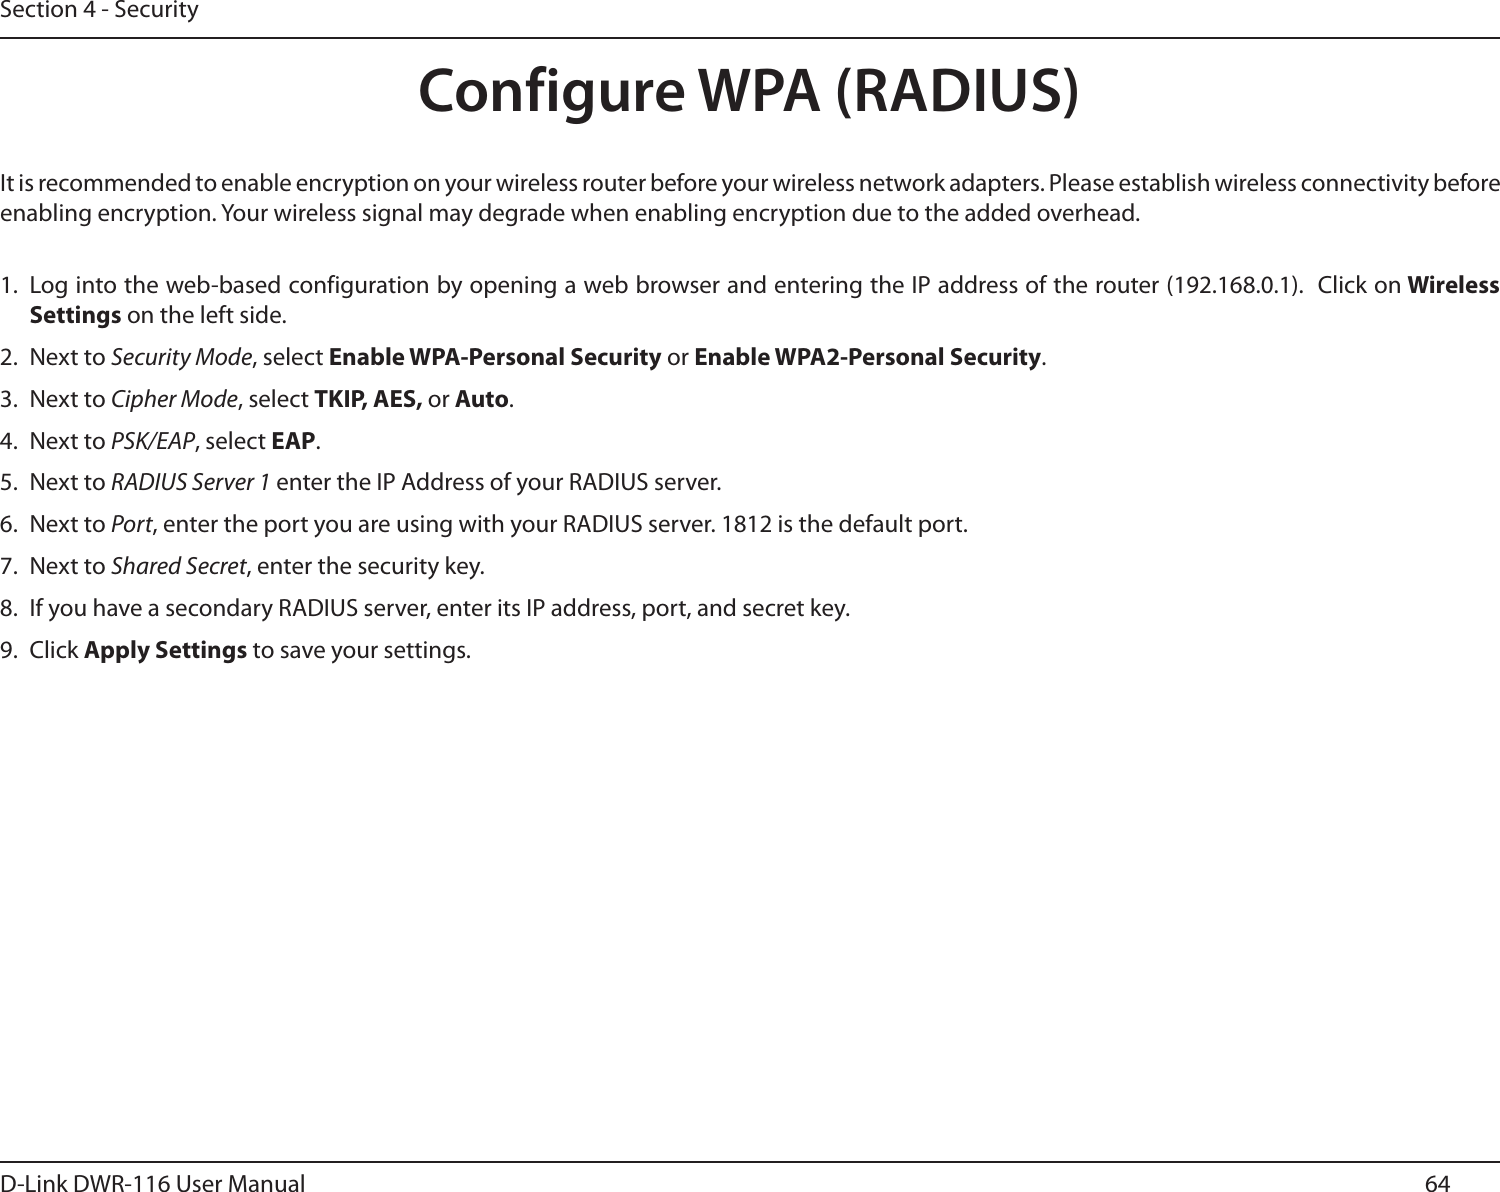 64D-Link DWR-116 User ManualSection 4 - SecurityConfigure WPA (RADIUS)It is recommended to enable encryption on your wireless router before your wireless network adapters. Please establish wireless connectivity before enabling encryption. Your wireless signal may degrade when enabling encryption due to the added overhead.1. Log into the web-based configuration by opening a web browser and entering the IP address of the router (192.168.0.1).  Click on Wireless Settings on the left side.2.  Next to Security Mode, select Enable WPA-Personal Security or Enable WPA2-Personal Security.3.  Next to Cipher Mode, select TKIP, AES, or Auto.4.  Next to PSK/EAP, select EAP.5.  Next to RADIUS Server 1 enter the IP Address of your RADIUS server.6.  Next to Port, enter the port you are using with your RADIUS server. 1812 is the default port.7.  Next to Shared Secret, enter the security key.8.  If you have a secondary RADIUS server, enter its IP address, port, and secret key.9.  Click Apply Settings to save your settings.